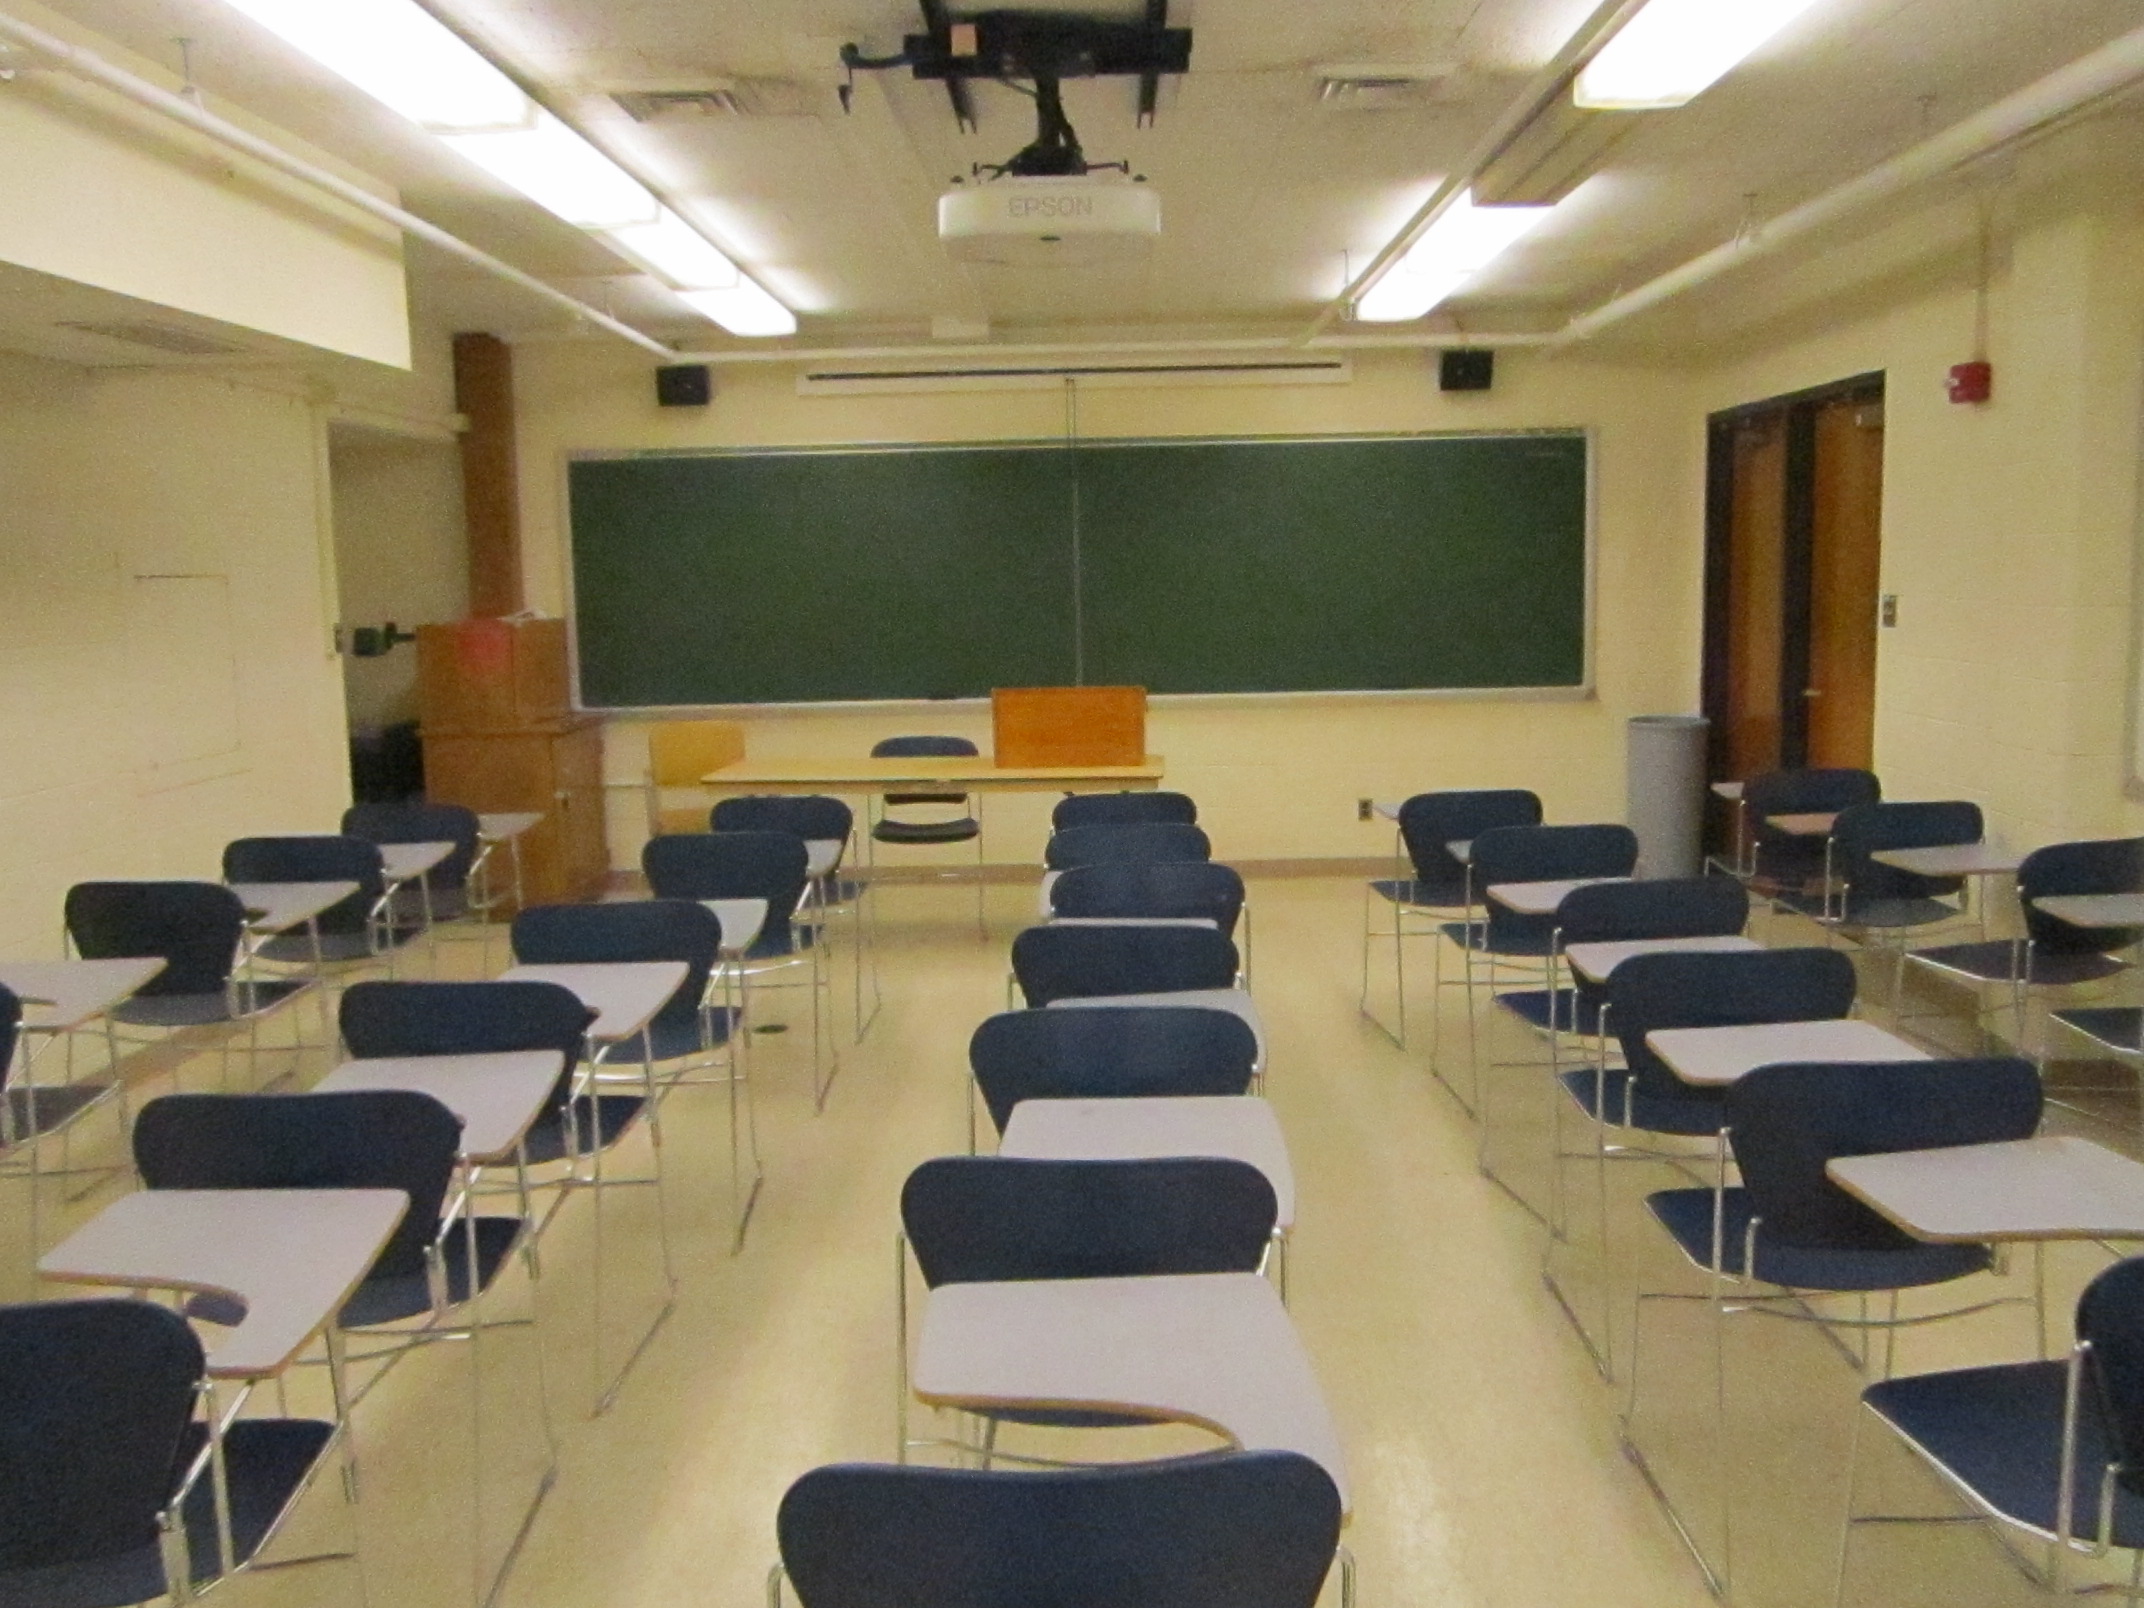 A view of the classroom with movable tableted arm chairs, chalkboard, and instructor table in front